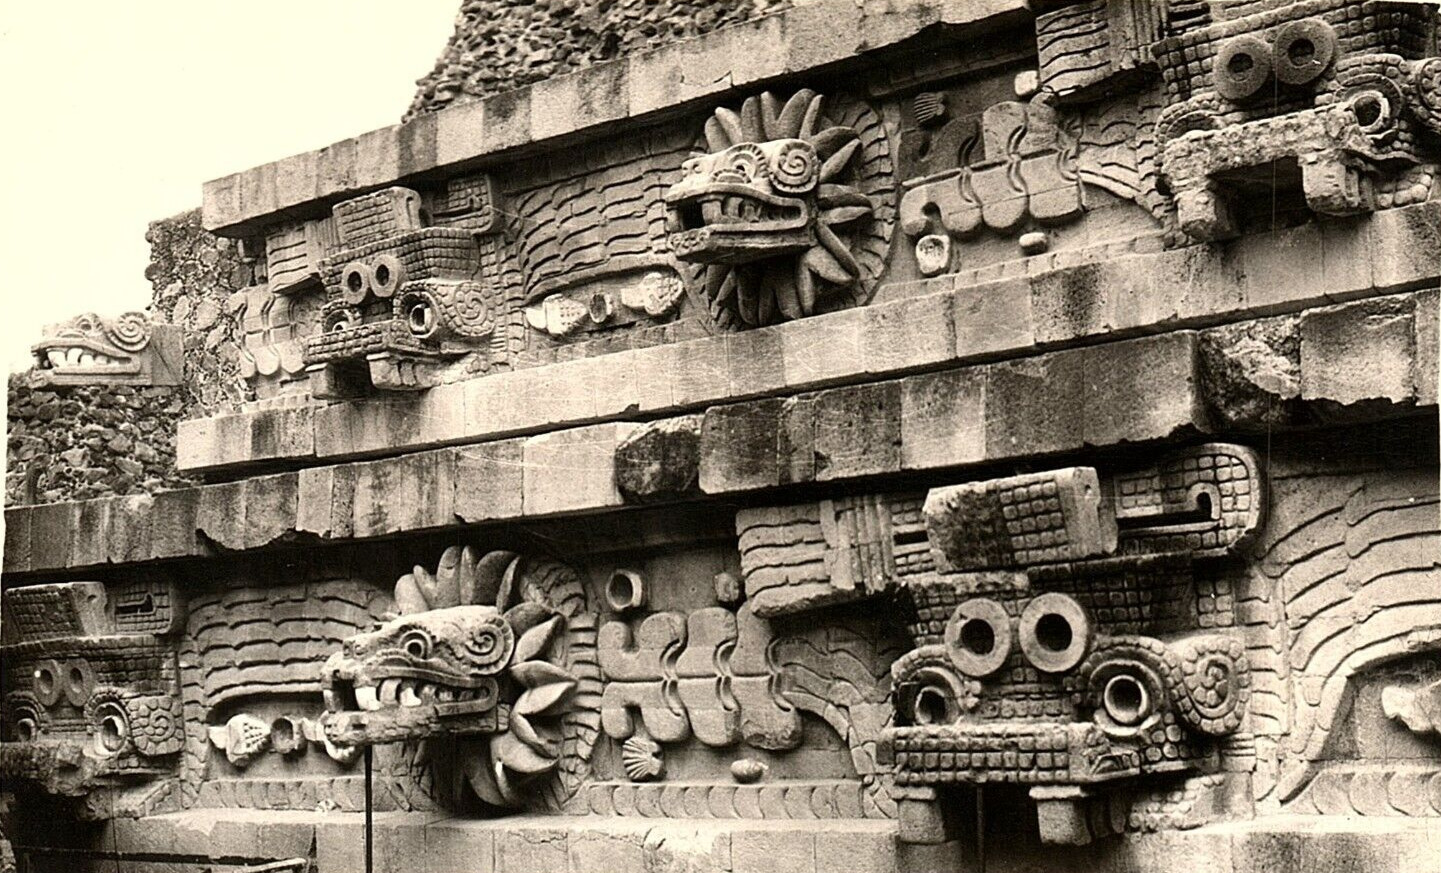 1930s THE QUETZALCOATL TEMPLE DETAIL TEOTIHUACAN, MEXICO RPPC POSTCARD P1193